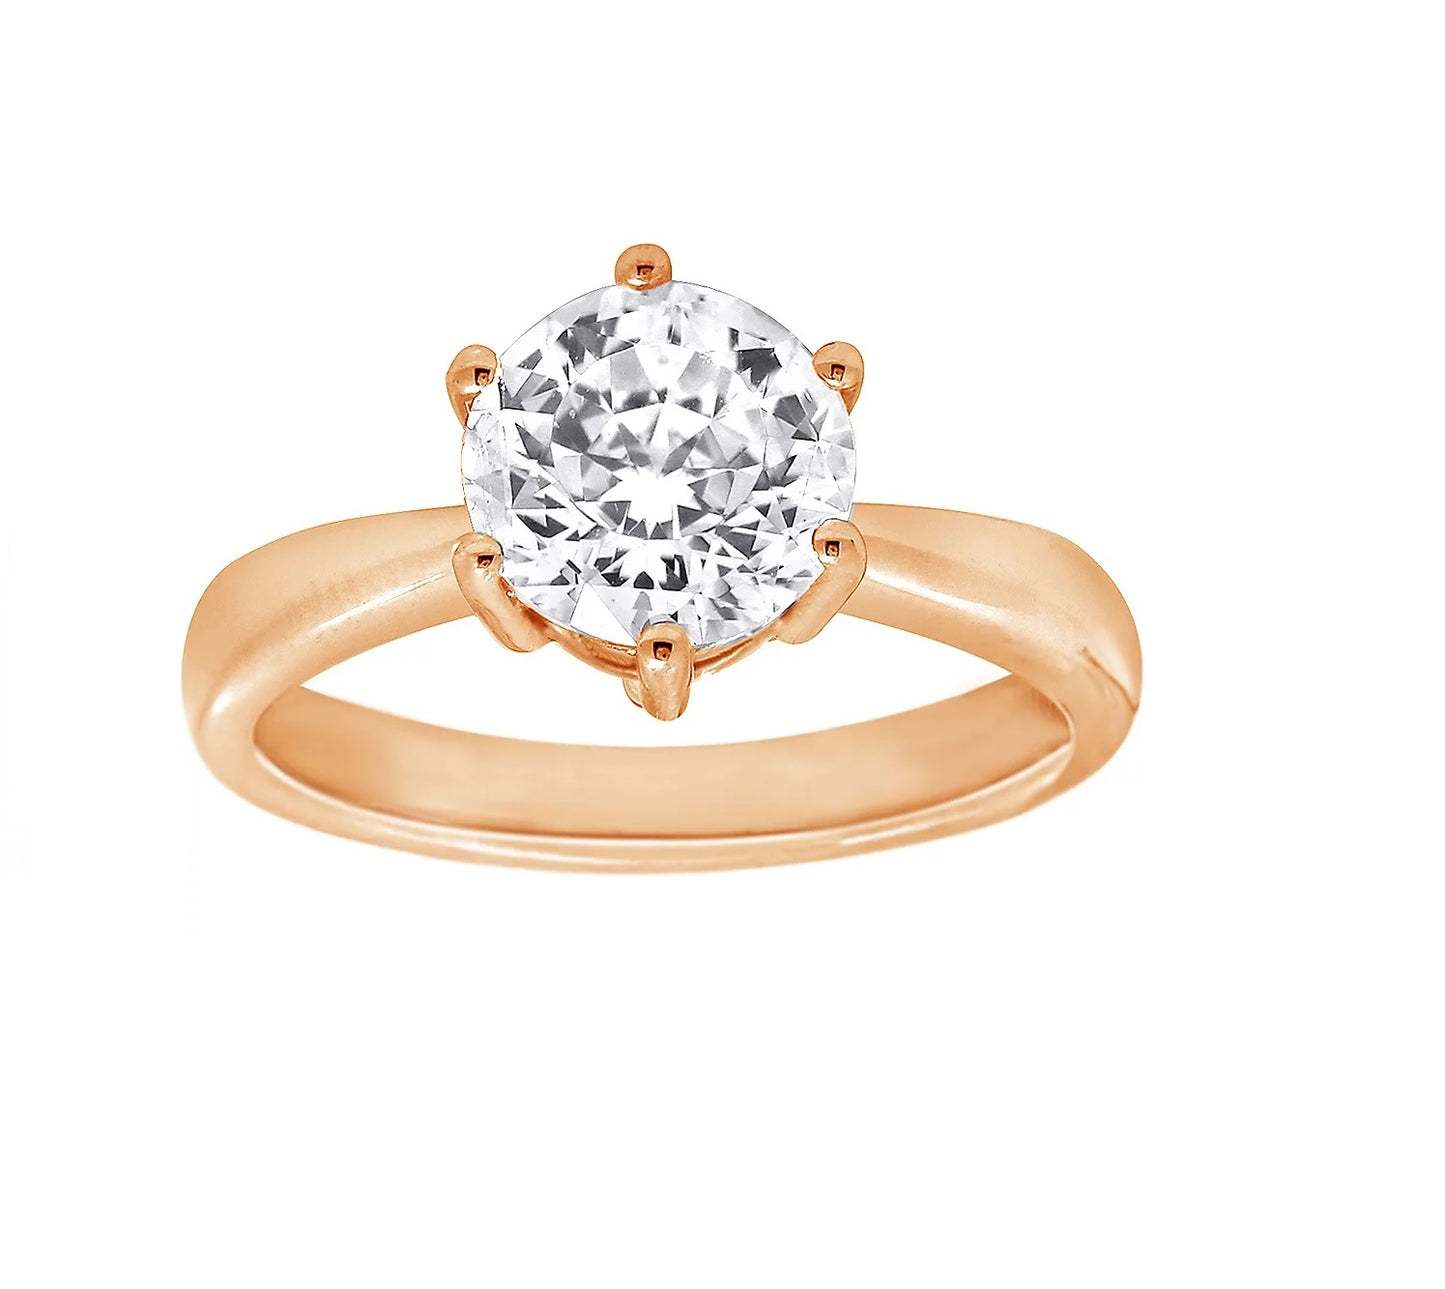 3.00cttw Round Cut 6 Prongs Solitaire Ring